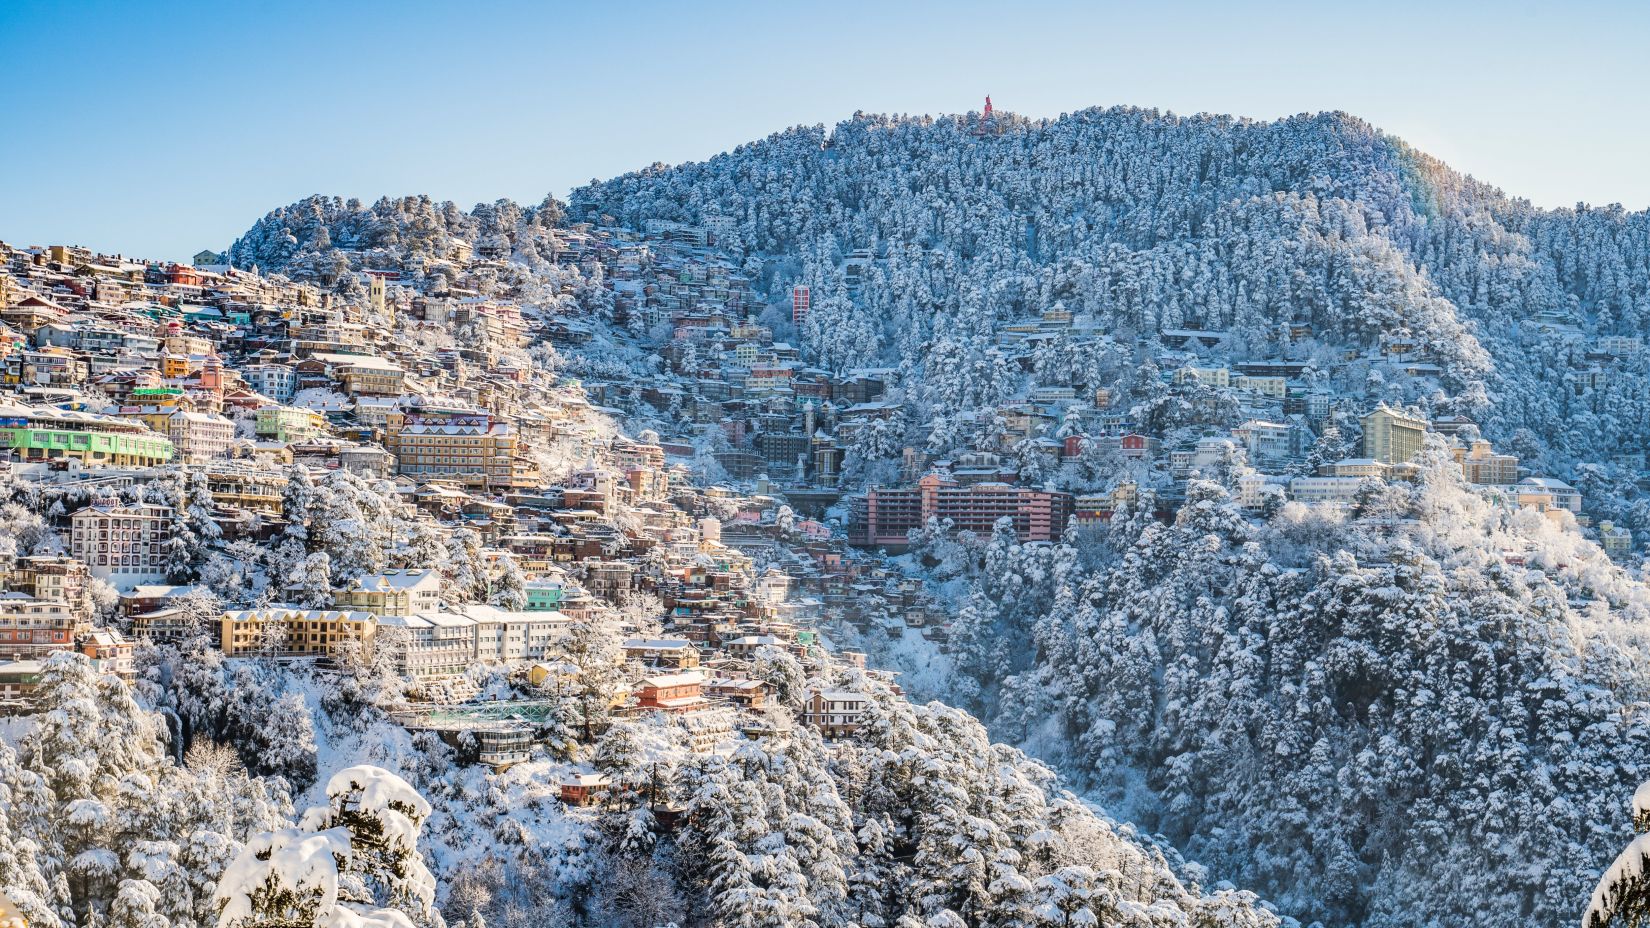 Shimla covered in show